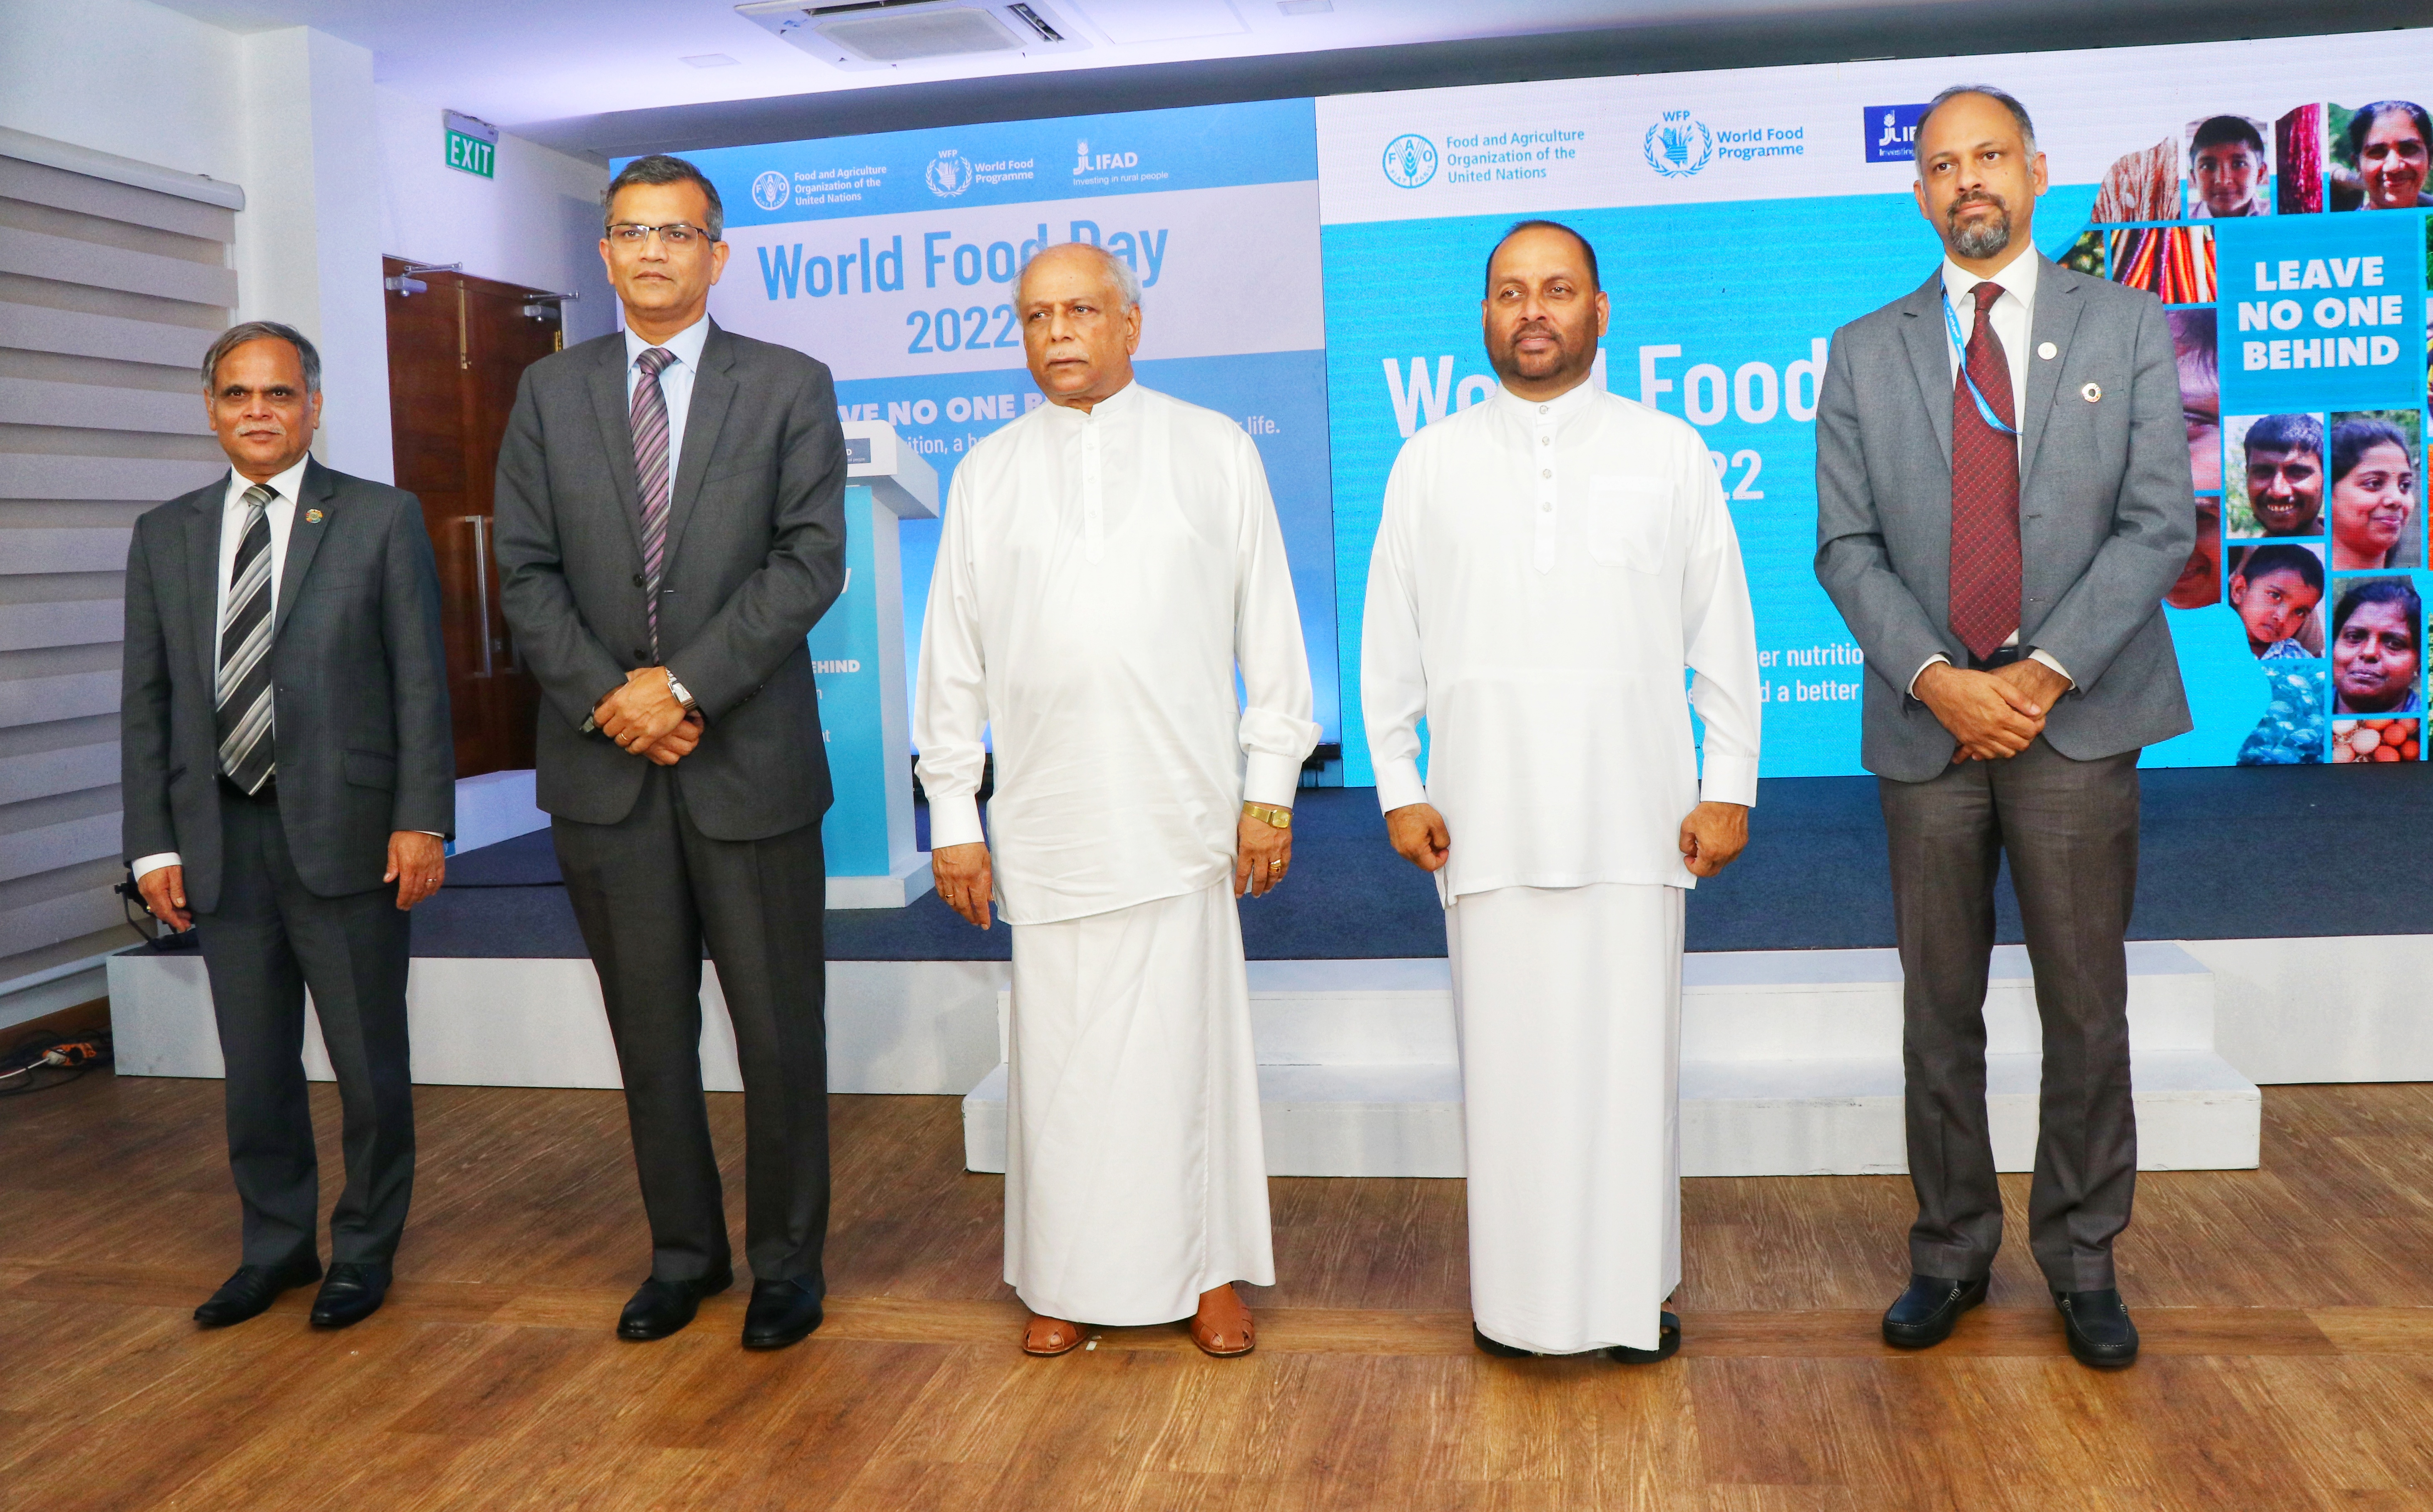 The Food and Agriculture Organization of the United Nations (FAO), together with the International Fund for Agricultural Development (IFAD) and the United Nations World Food Programme (WFP), marked World Food Day at an event at the UN in Colombo today [14]. Seen in the image are Prime Minister Hon. Dinesh Gunawardena, Minister of Agriculture Hon. Mahinda Amaraweera, United Nations Acting Resident Coordinator in Sri Lanka, Sarat Dash, Representative of the FAO for Sri Lanka and the Maldives, Vimlendra Shara